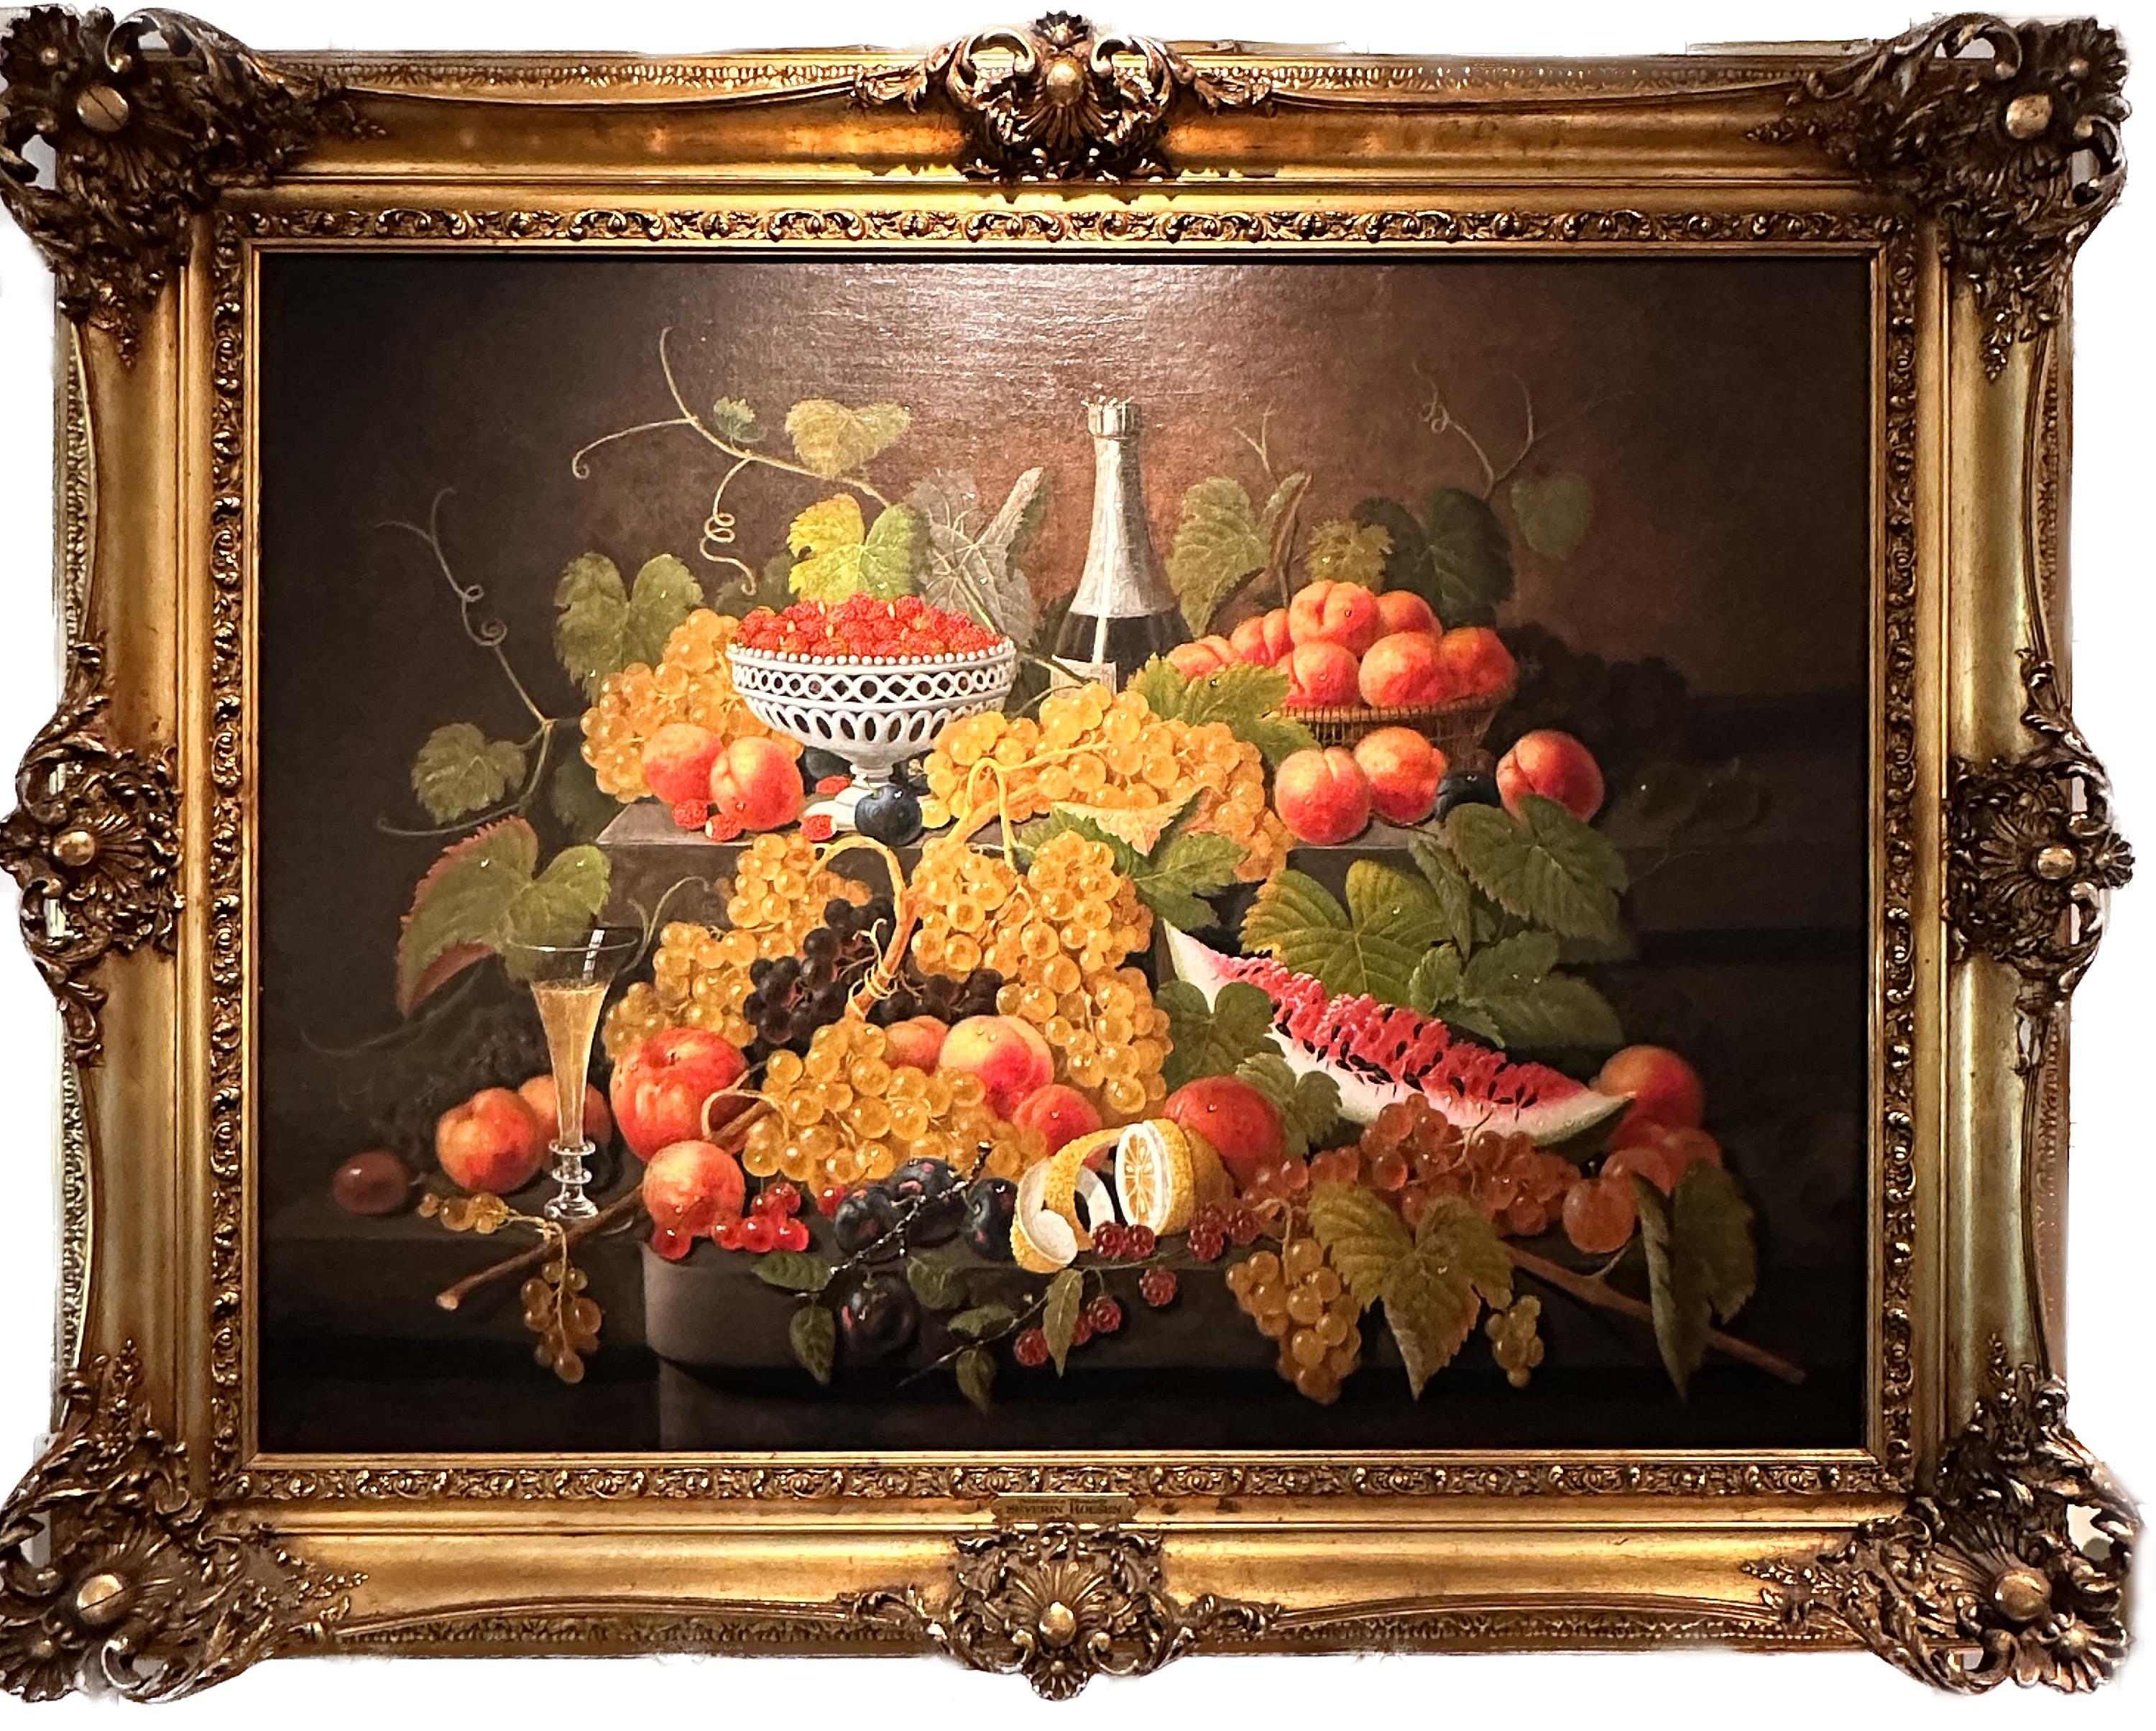 Nature's Bounty - Painting by Severin Roesen